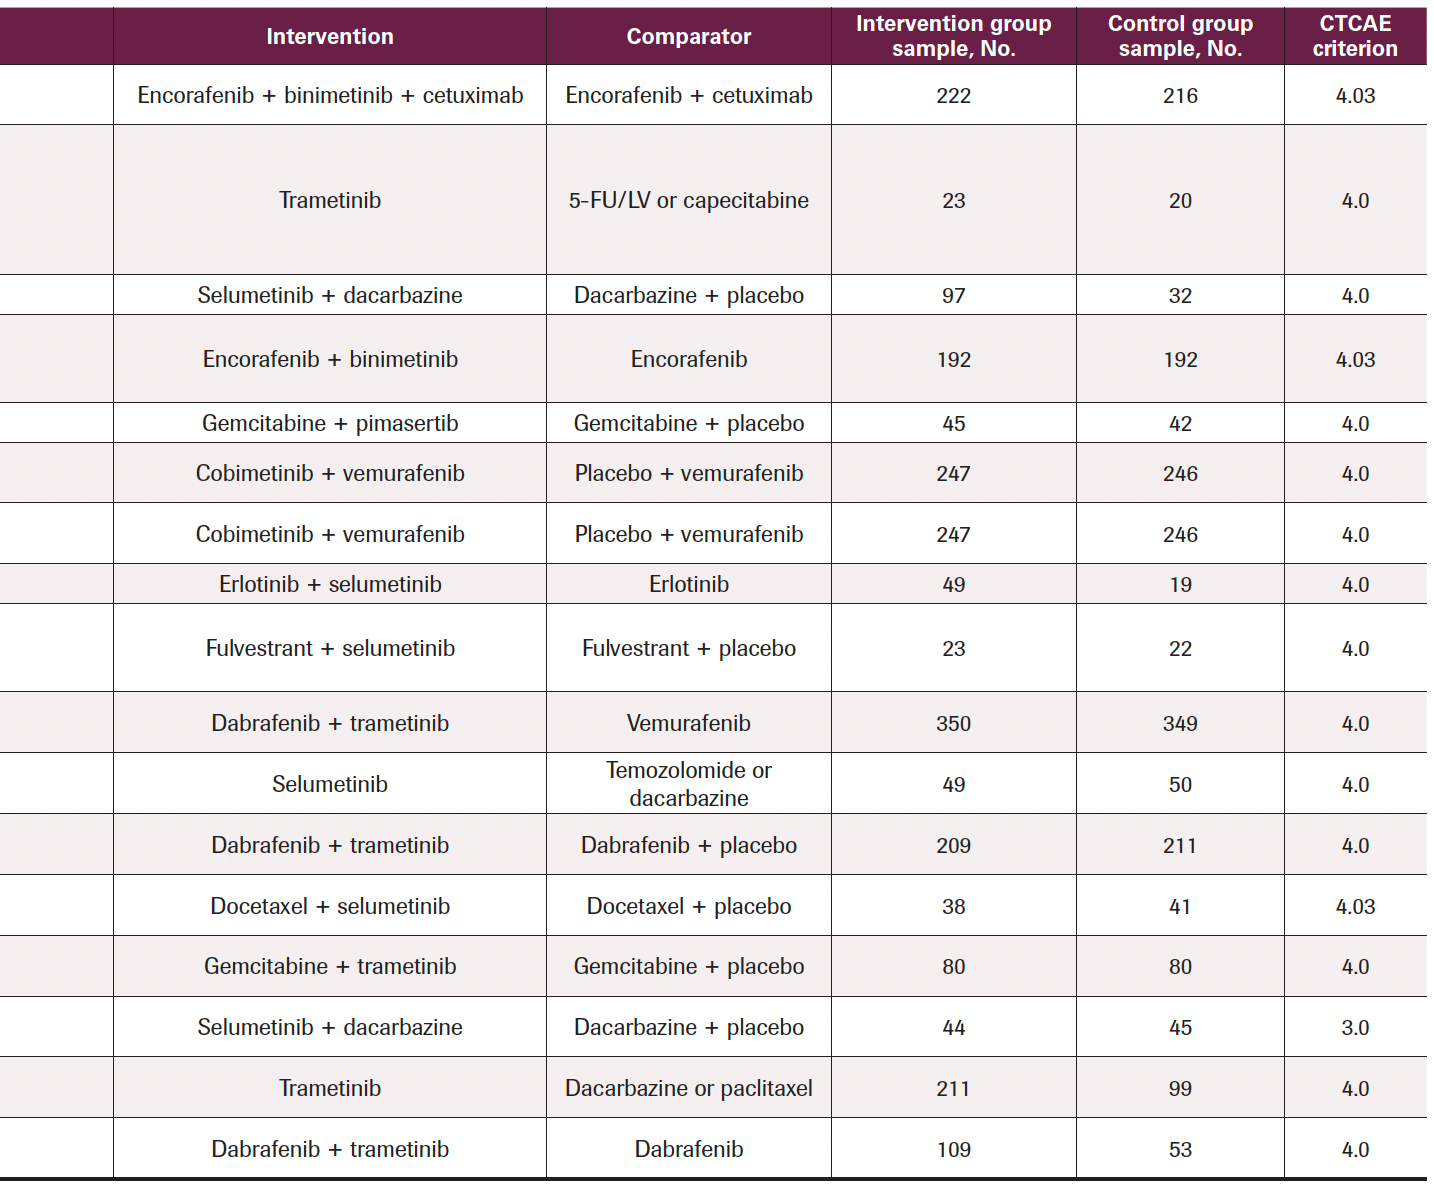 TABLE 1. Characteristics of the Included Studies